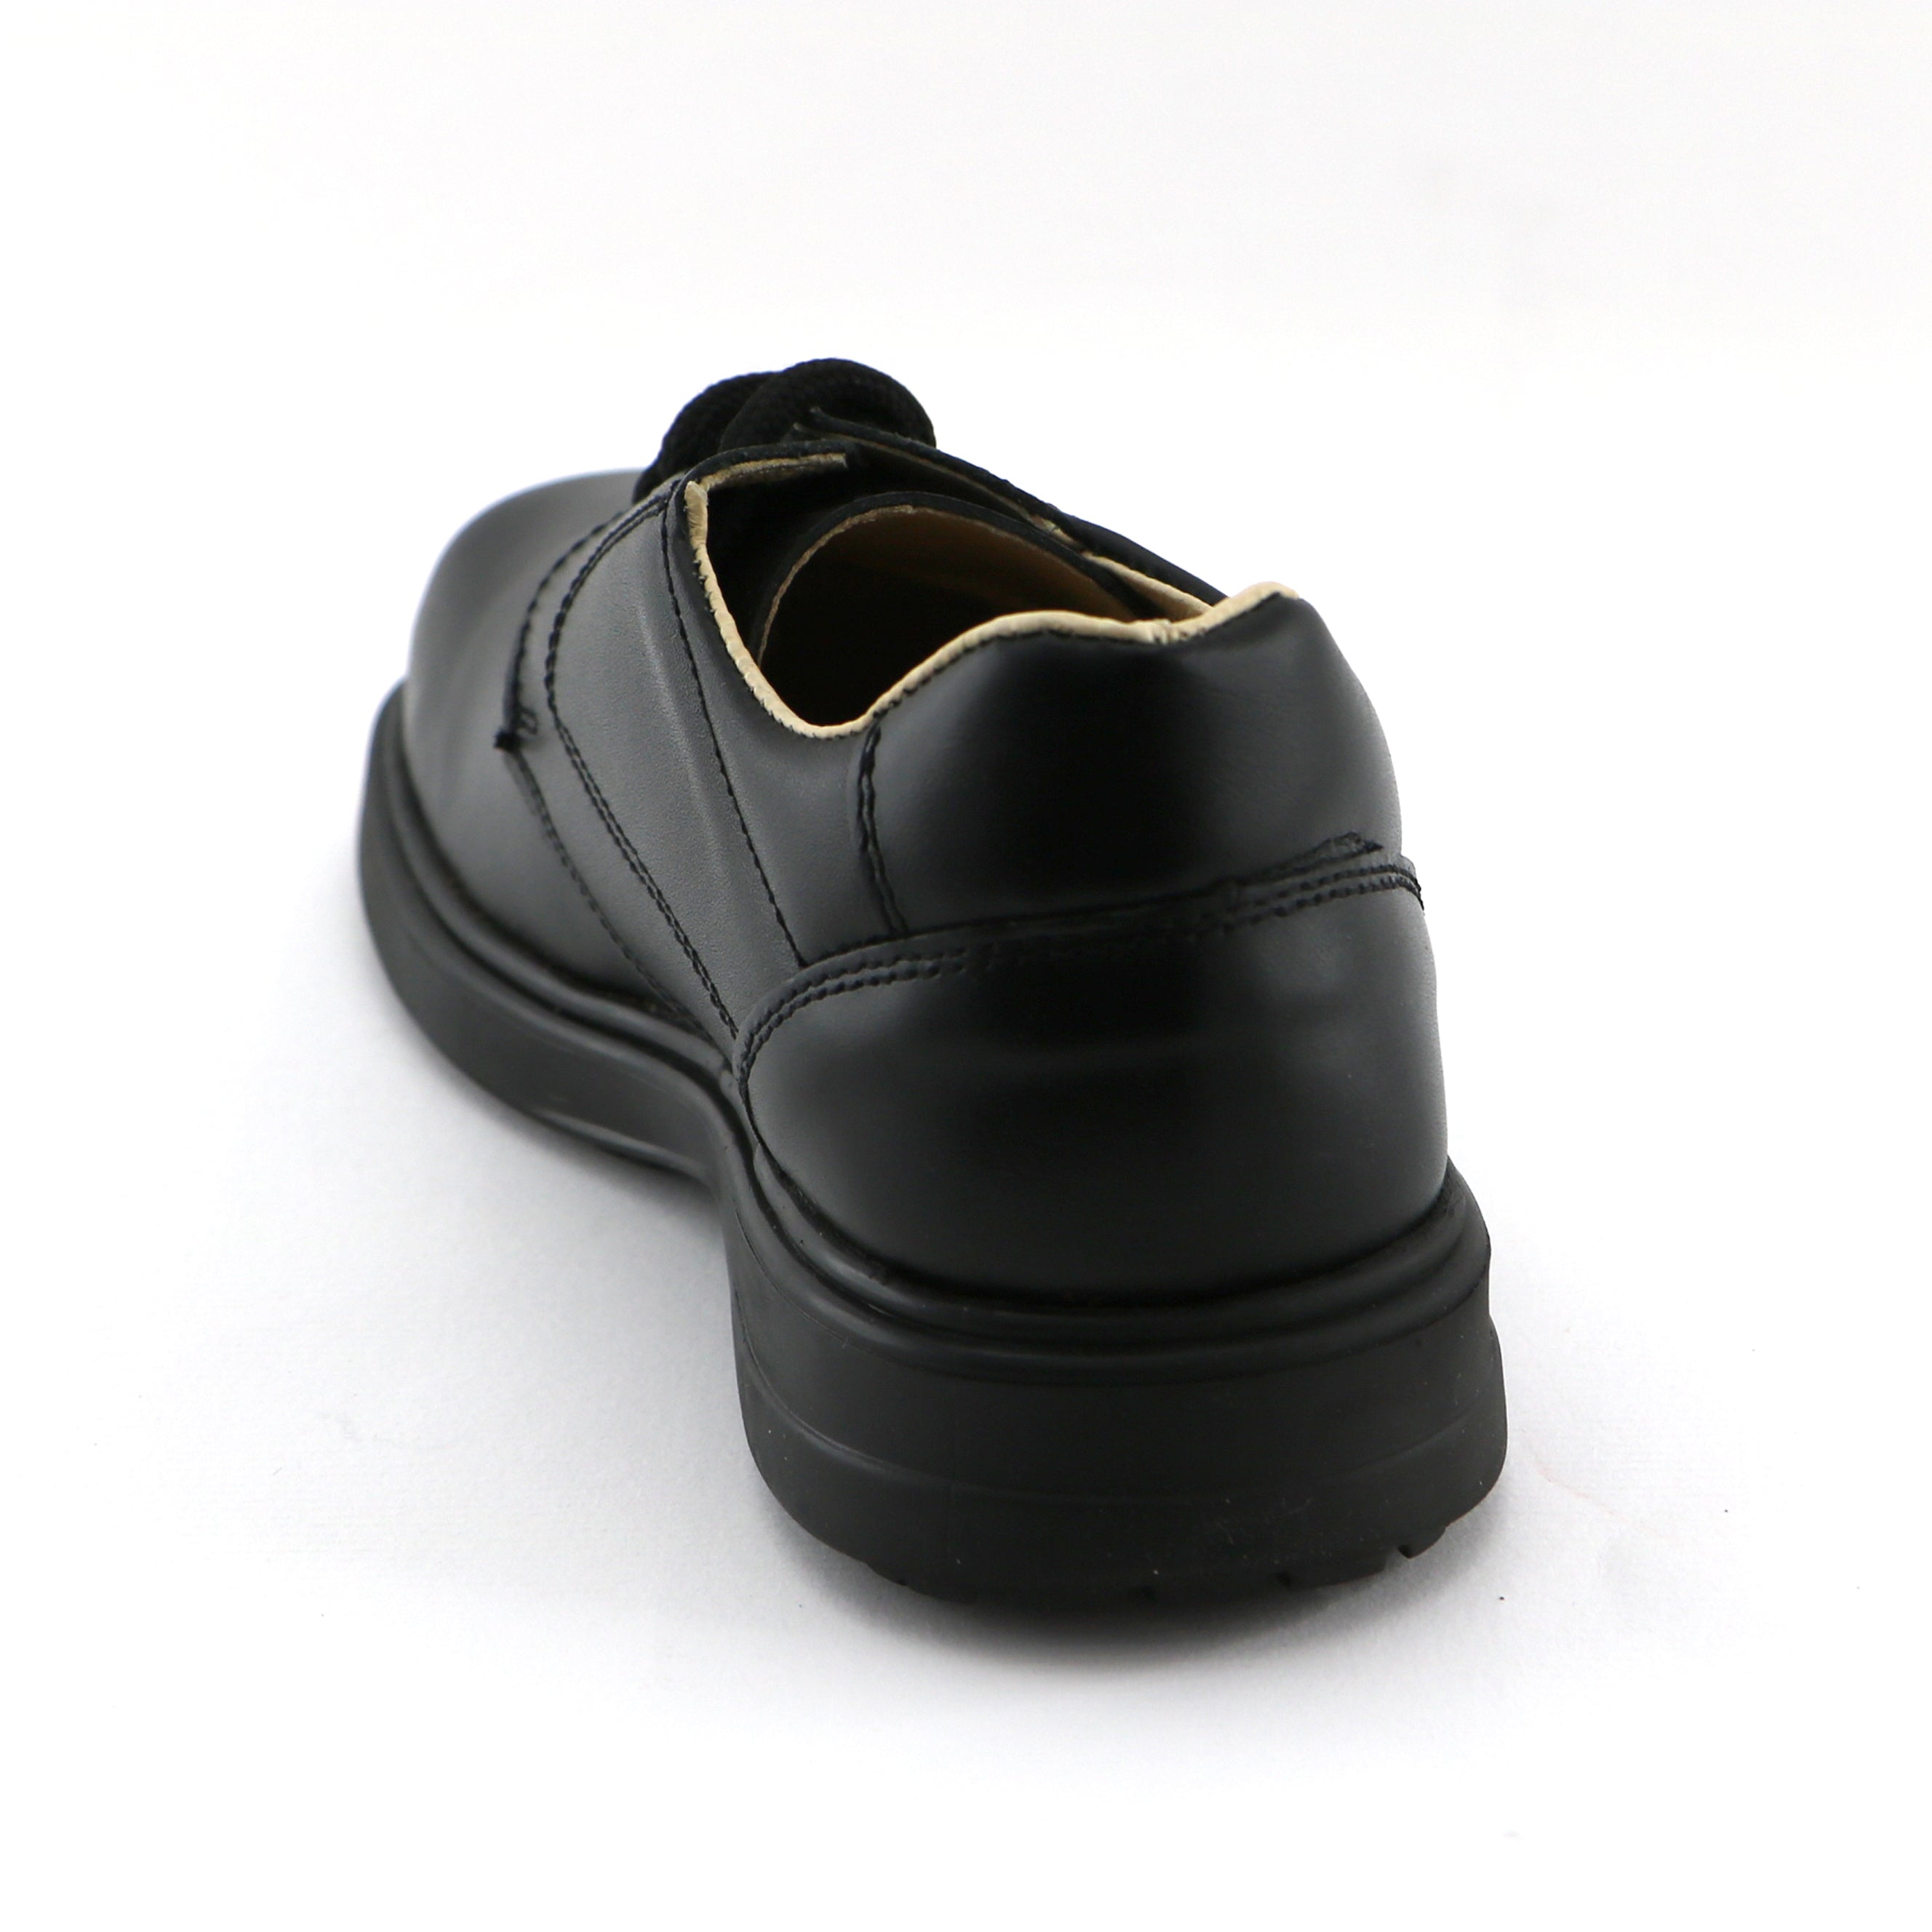 School shoes for boys – Simply Shoes 